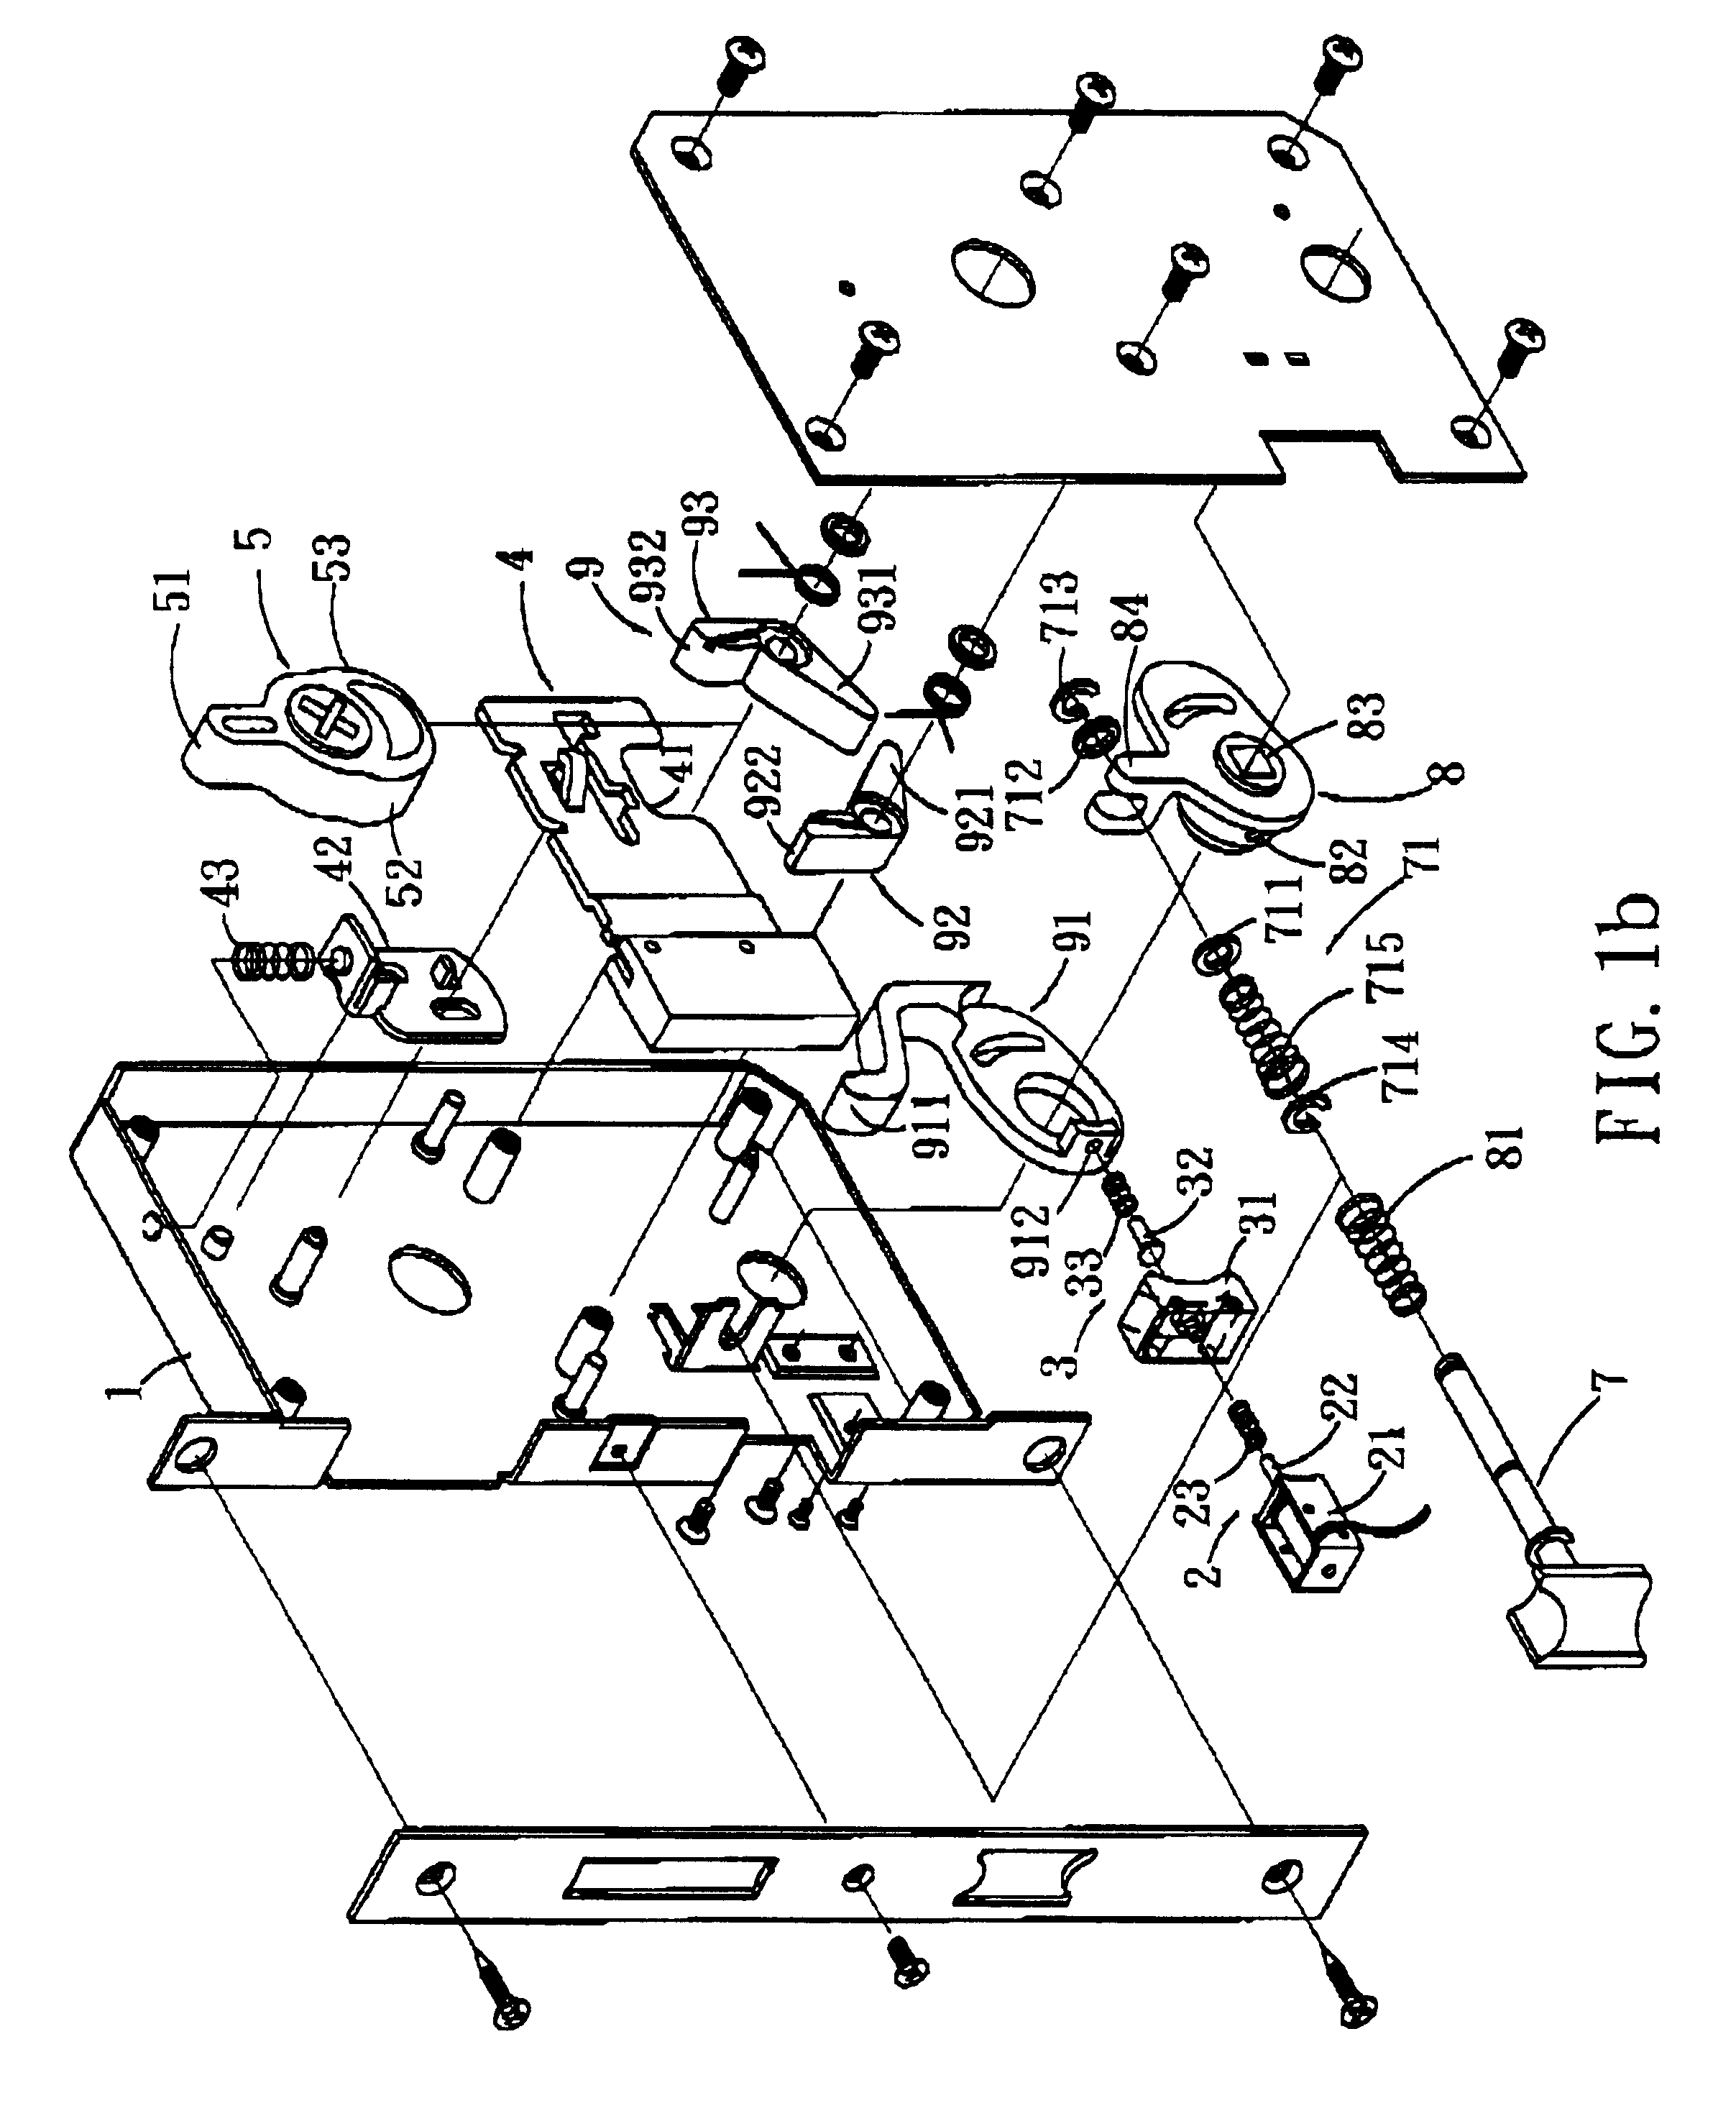 Lock construction having an electrically activated clutch mechanism and a transmission mechanism